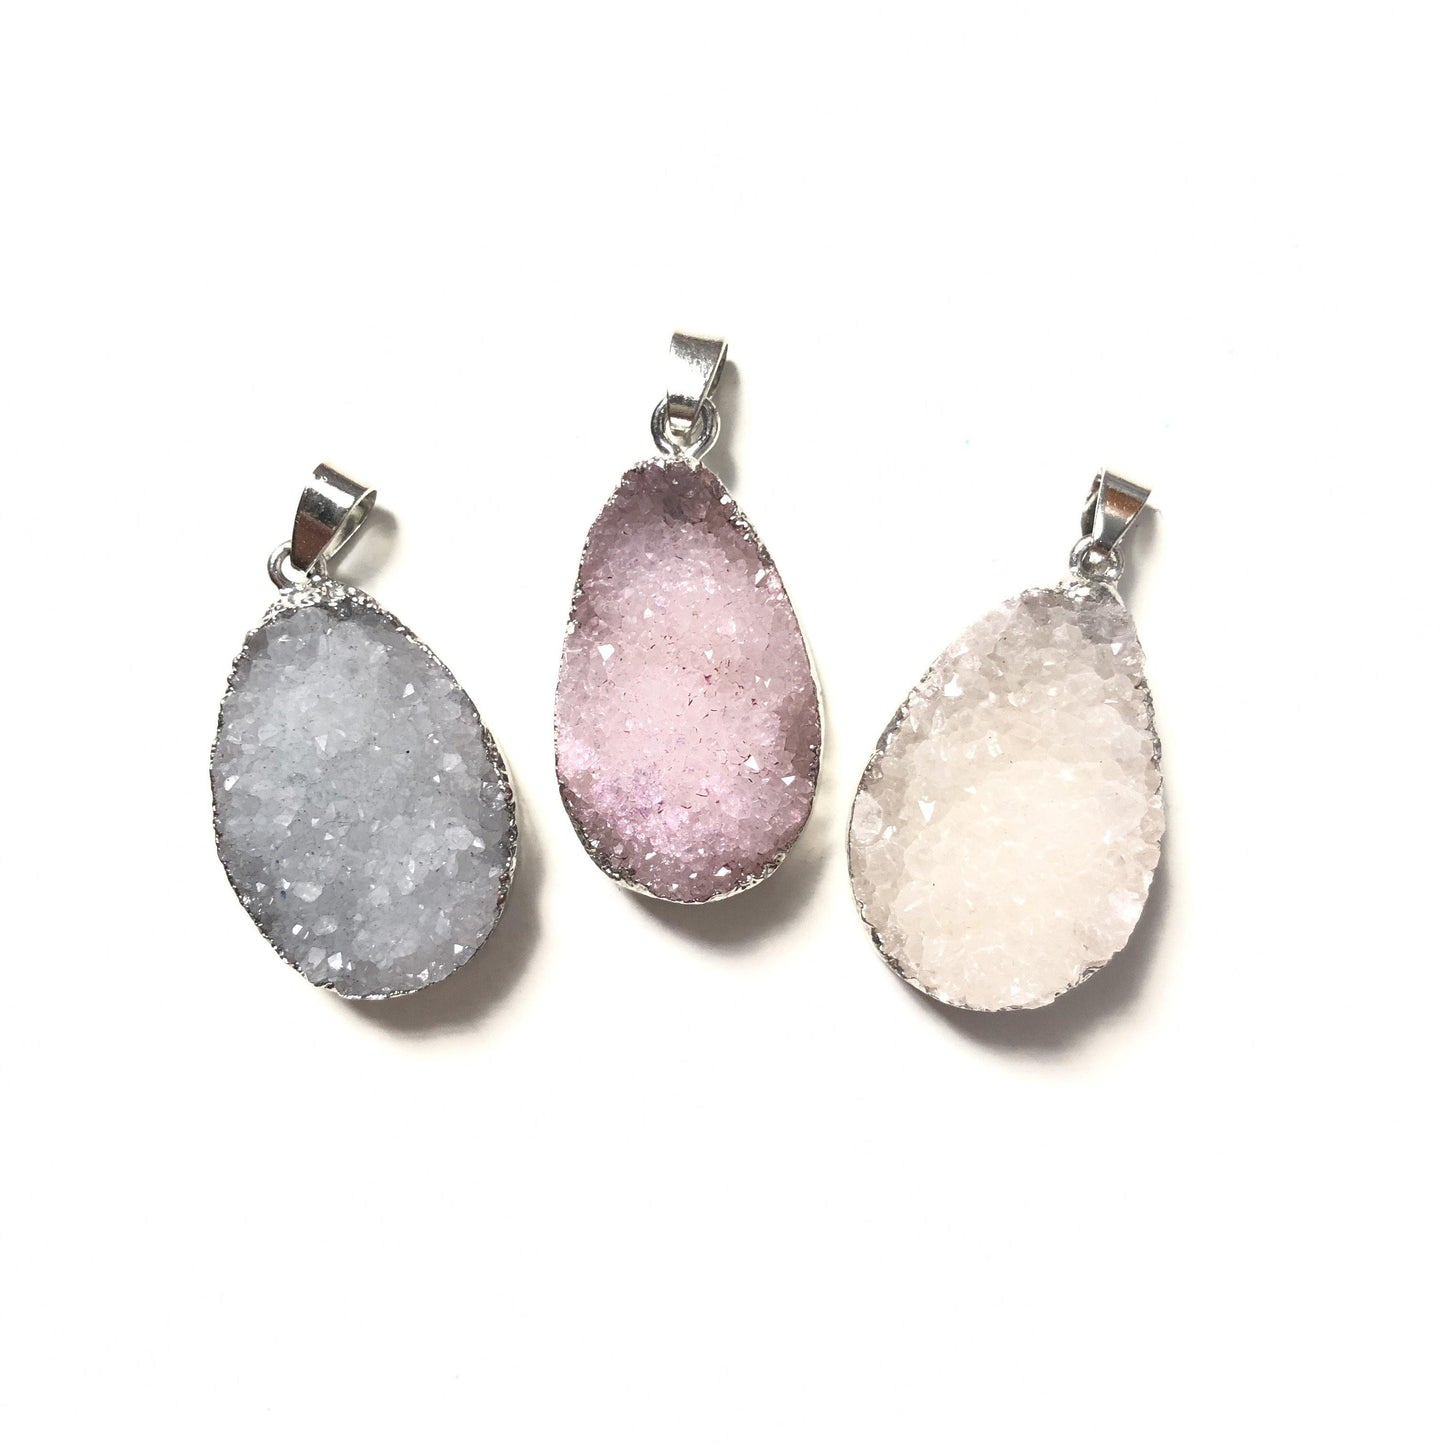 5pcs/lot 30*22mm Waterdrop Shape Natural Agate Druzy Charm-Silver Mix Colors (Random) Stone Charms Charms Beads Beyond